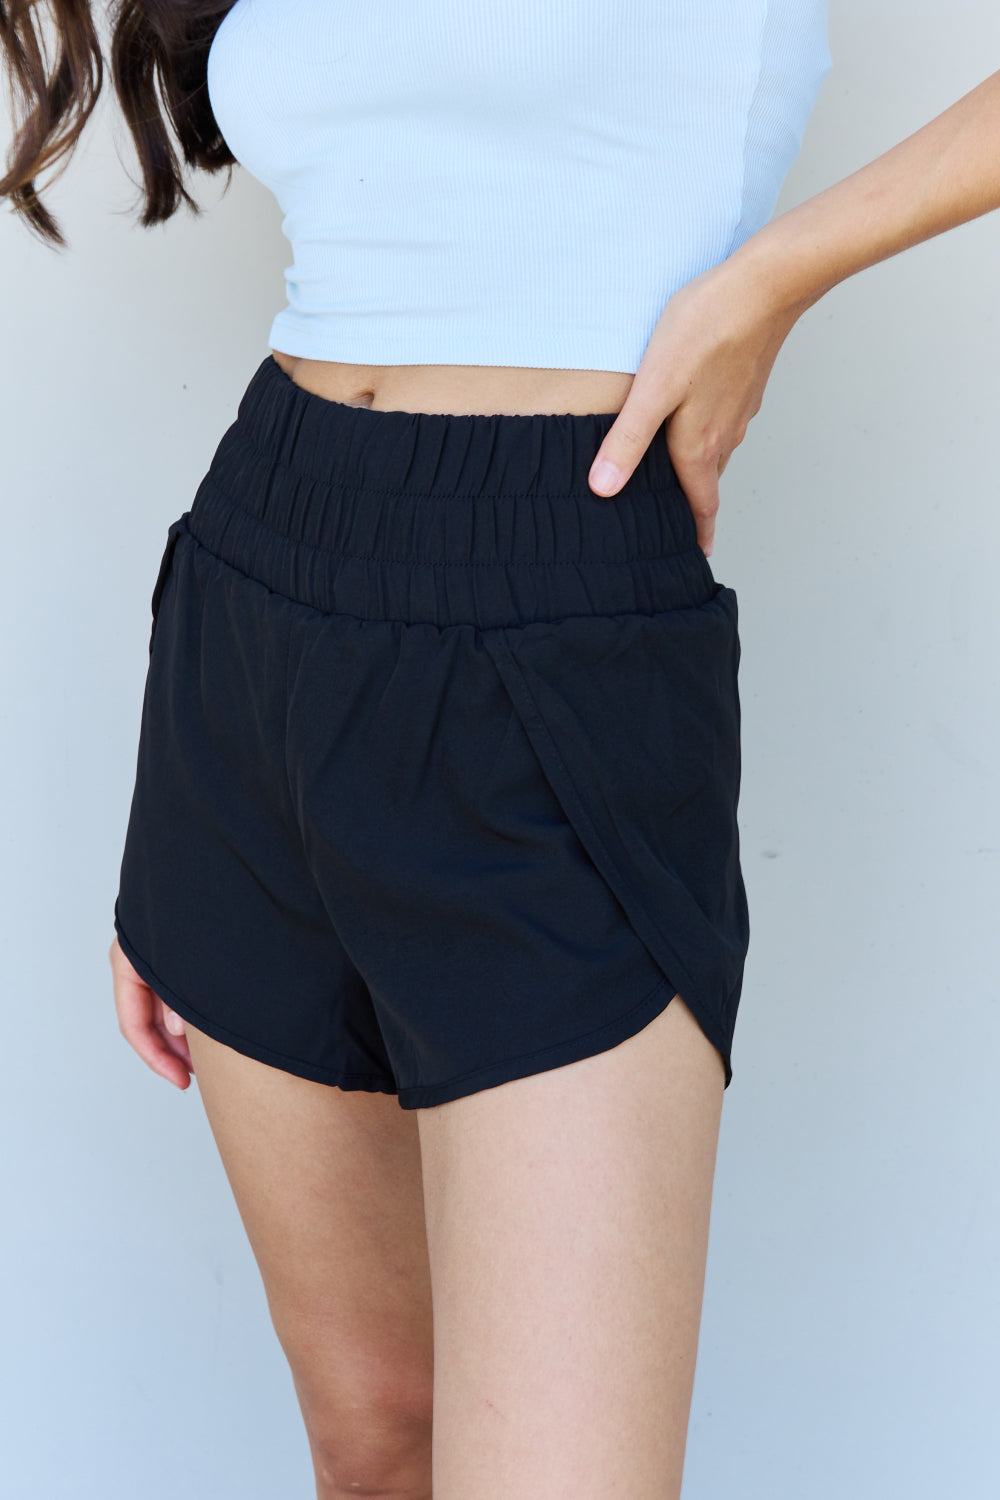 Ninexis Stay Active High Waistband Active Shorts in Black Print on any thing USA/STOD clothes